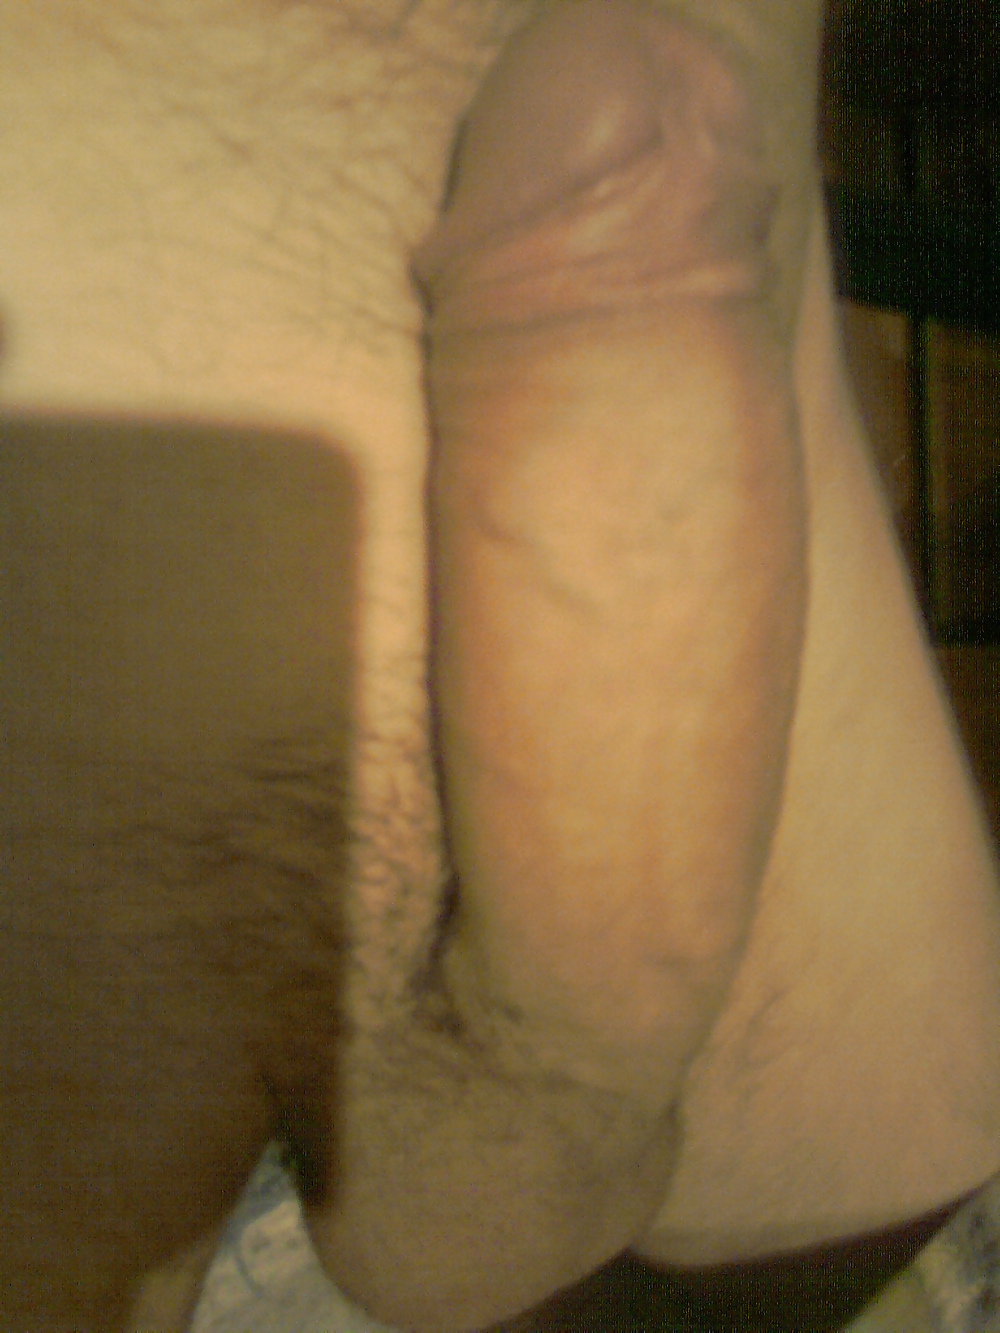 my cock   #4438983